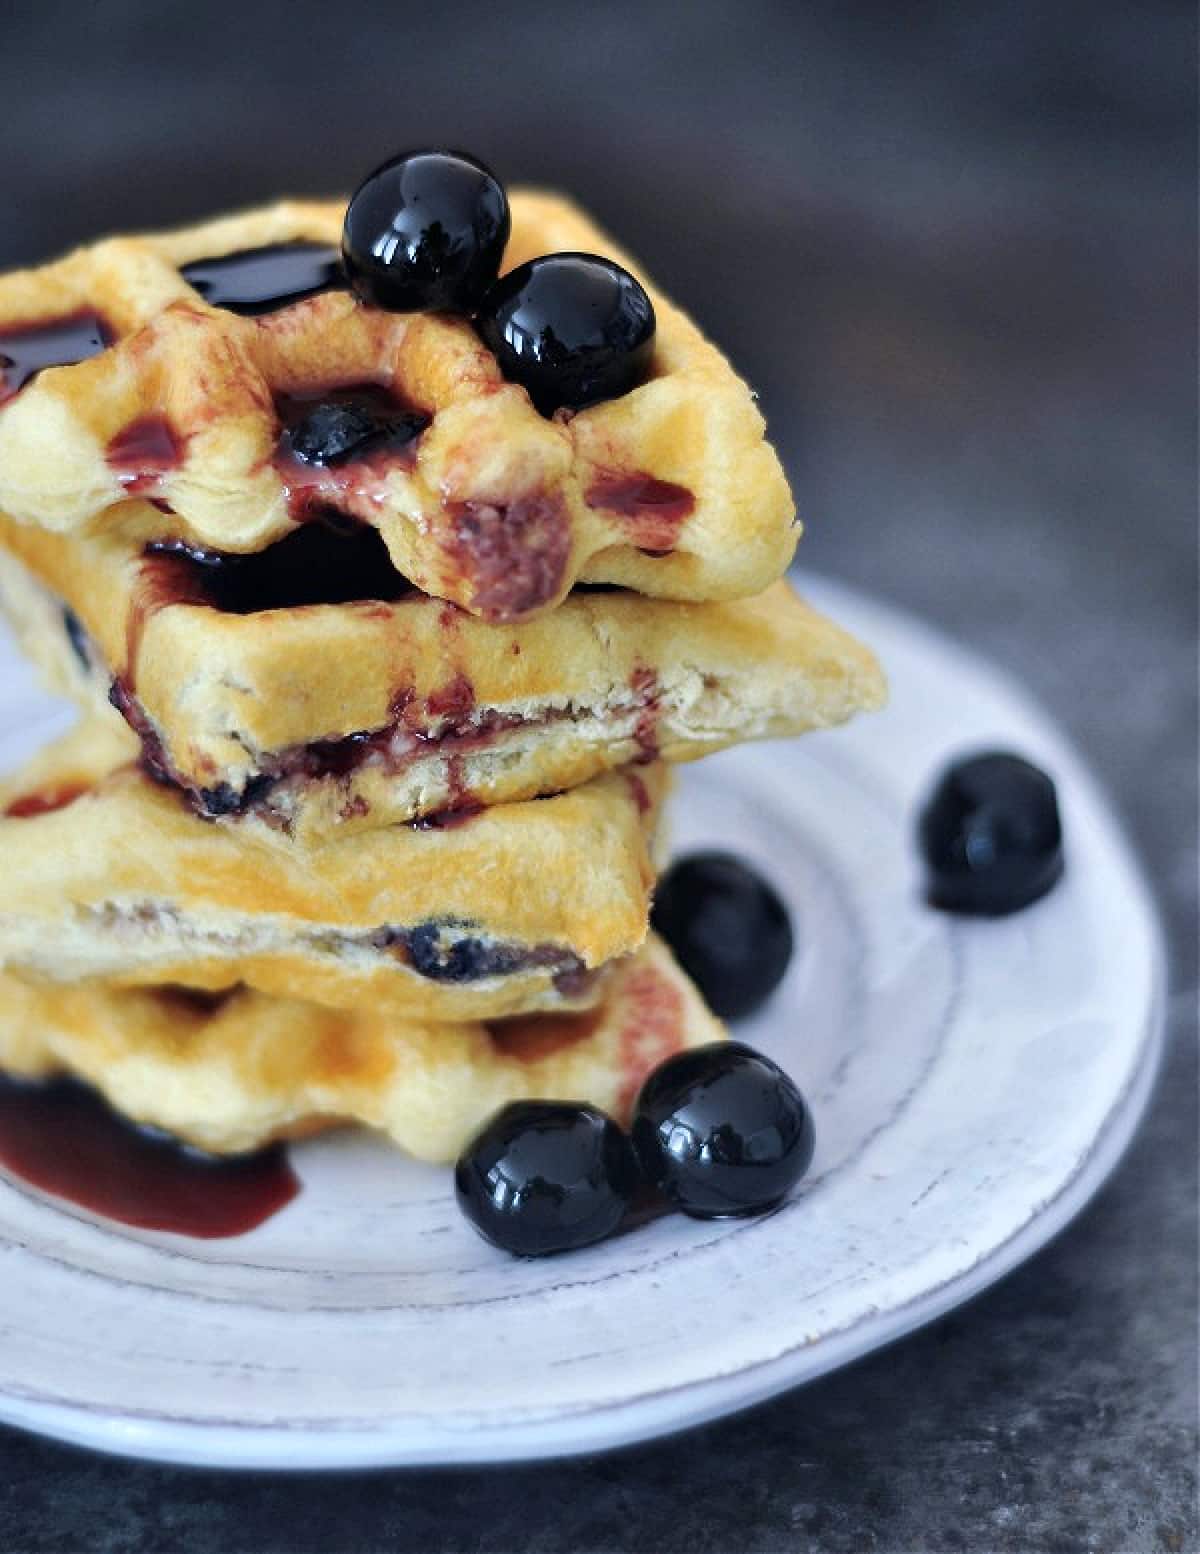 Luxardo cheesecake stuffed waffles stacked on a plate with cherries and syrup.